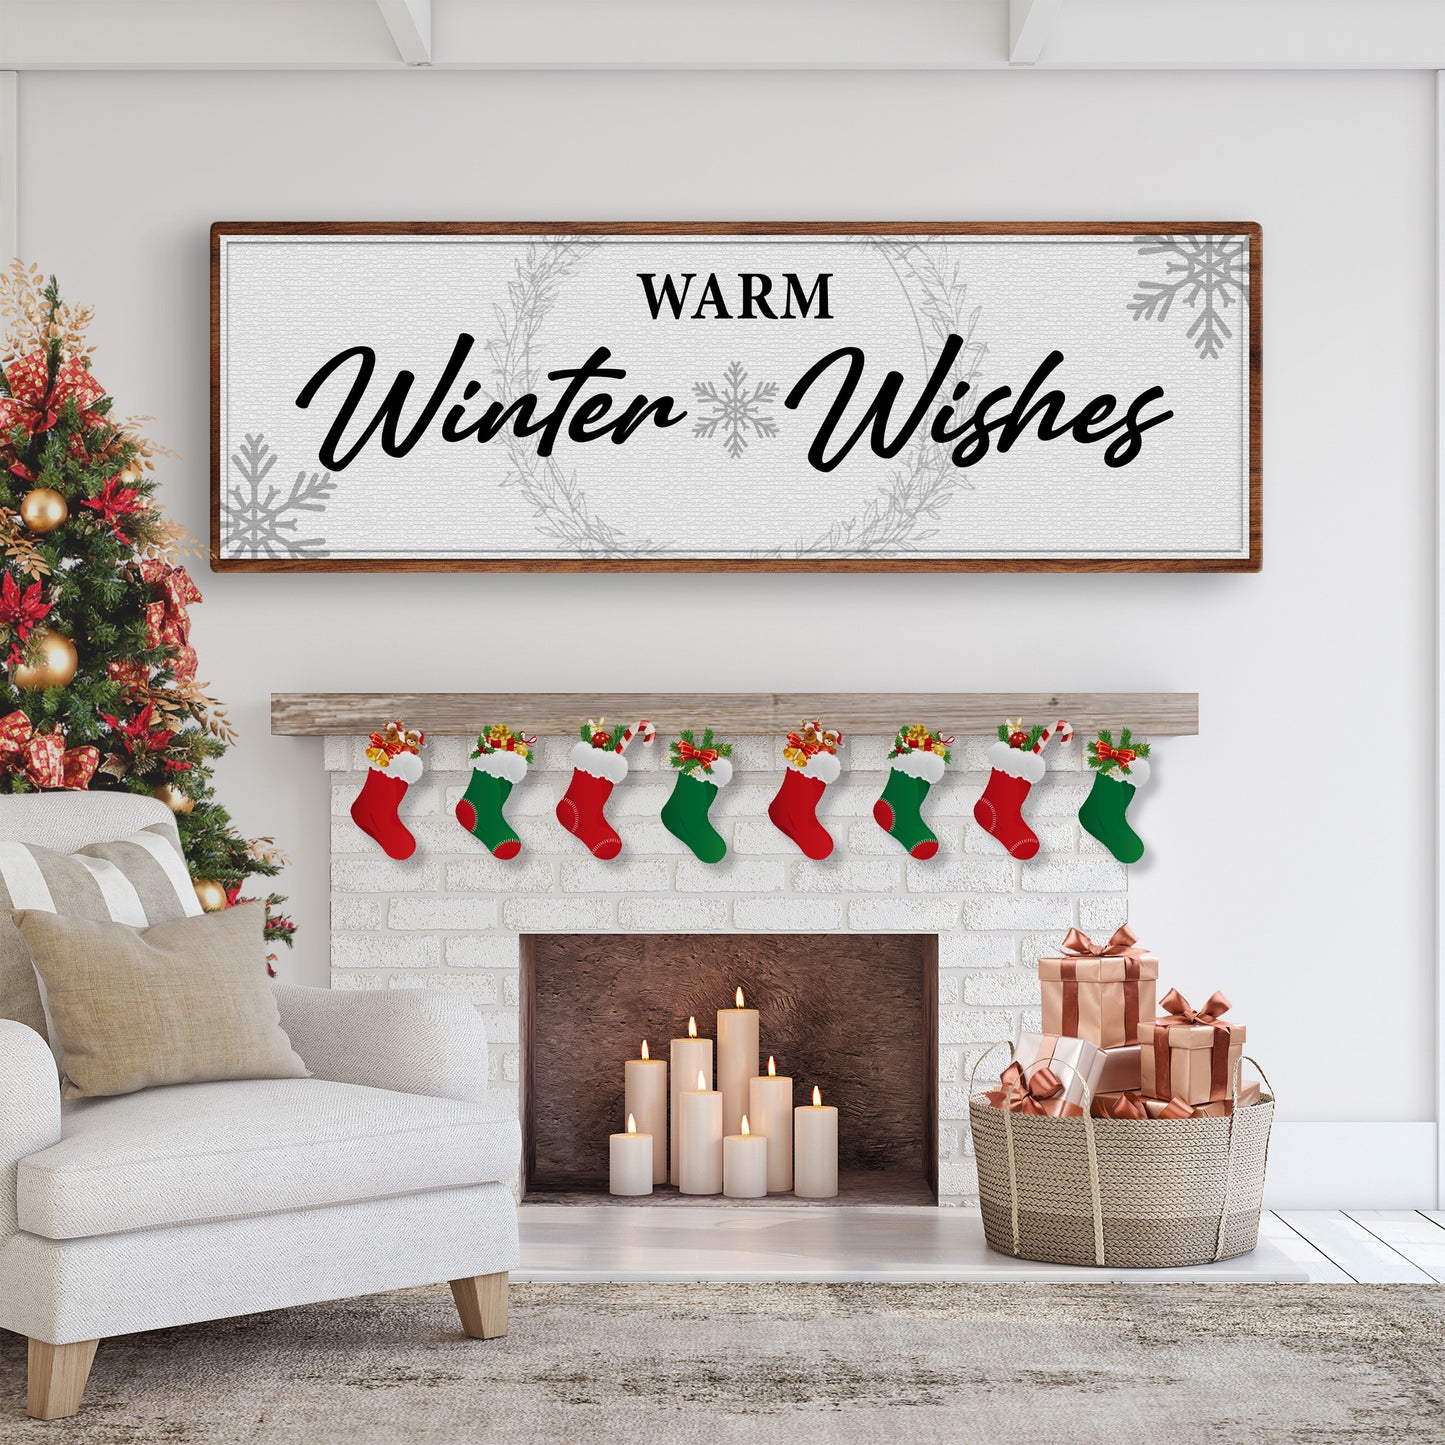 Warm Winter Wishes Sign  - Image by Tailored Canvases